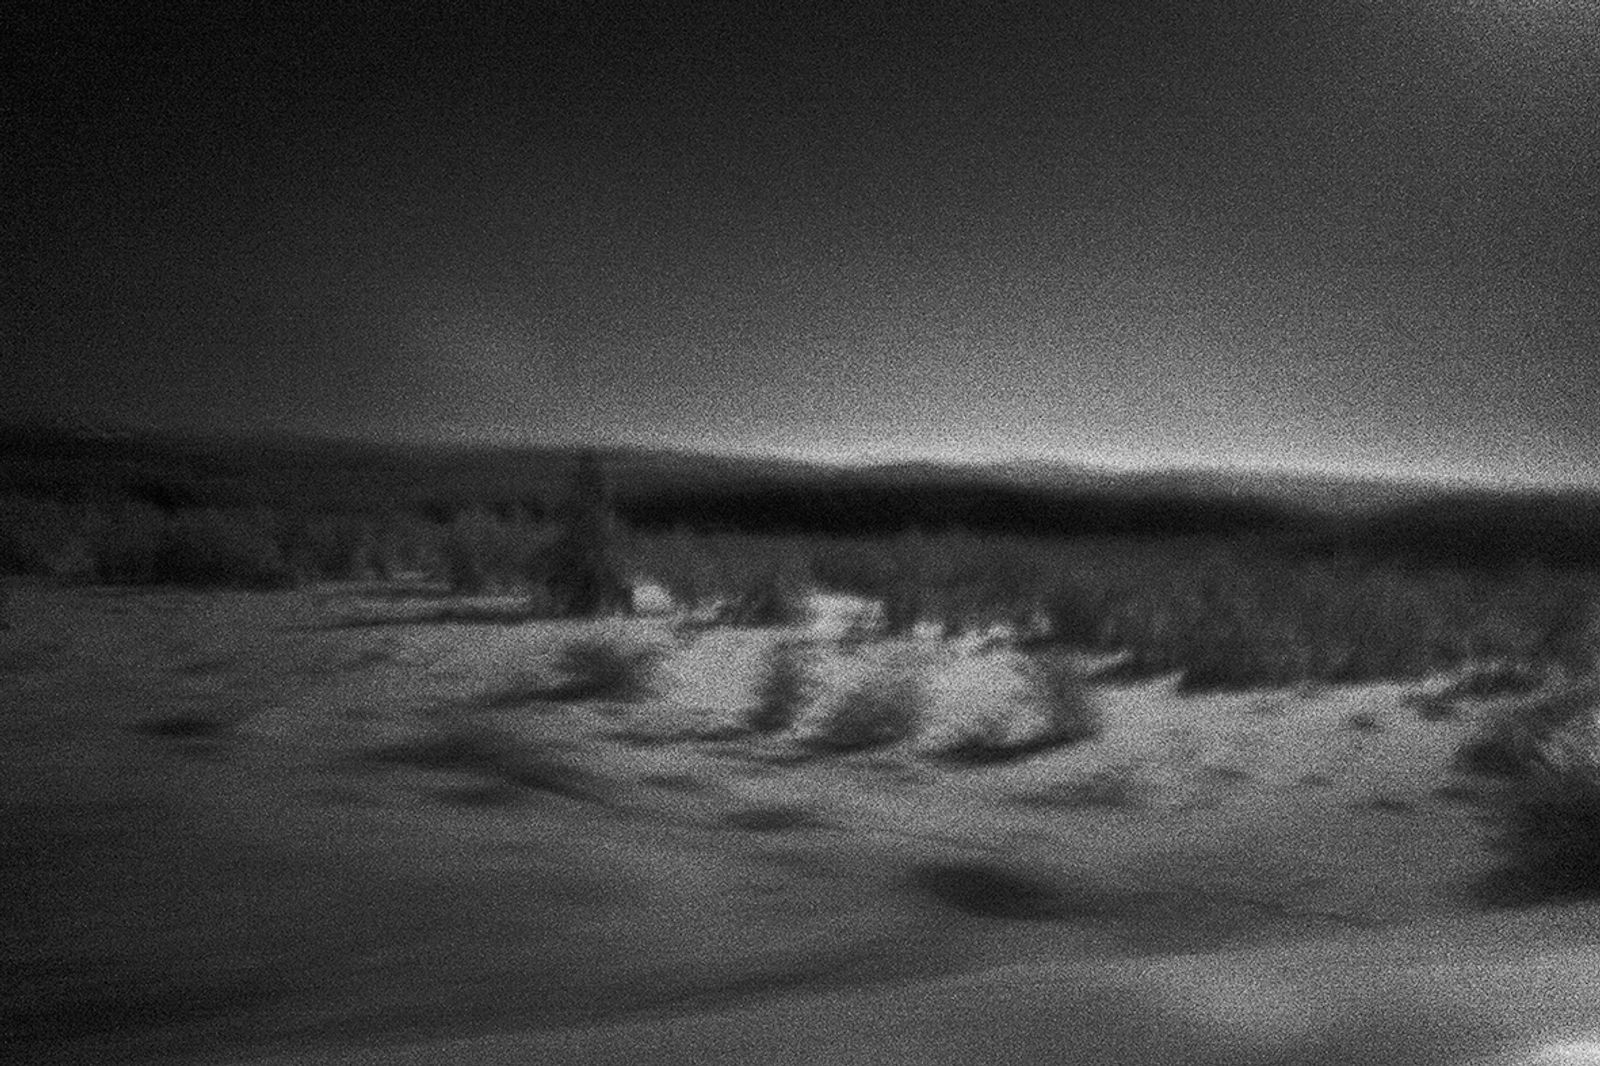 © Sara Zanella - Image from the The Way Home, Russia photography project